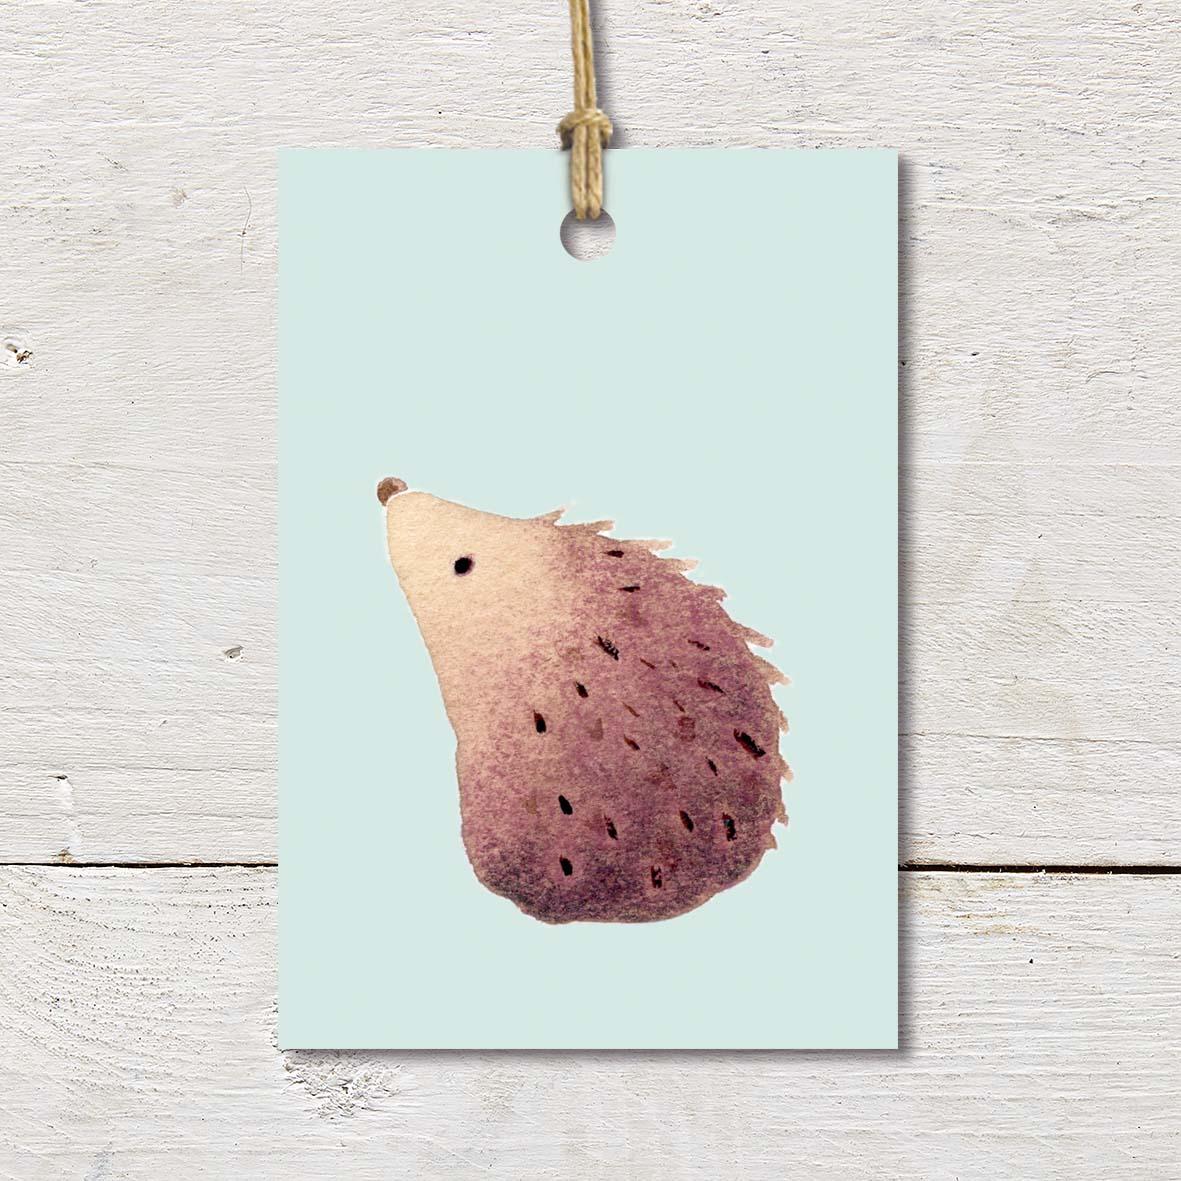 Gift Tag featuring a cute hedgehog on a pale aqua background.